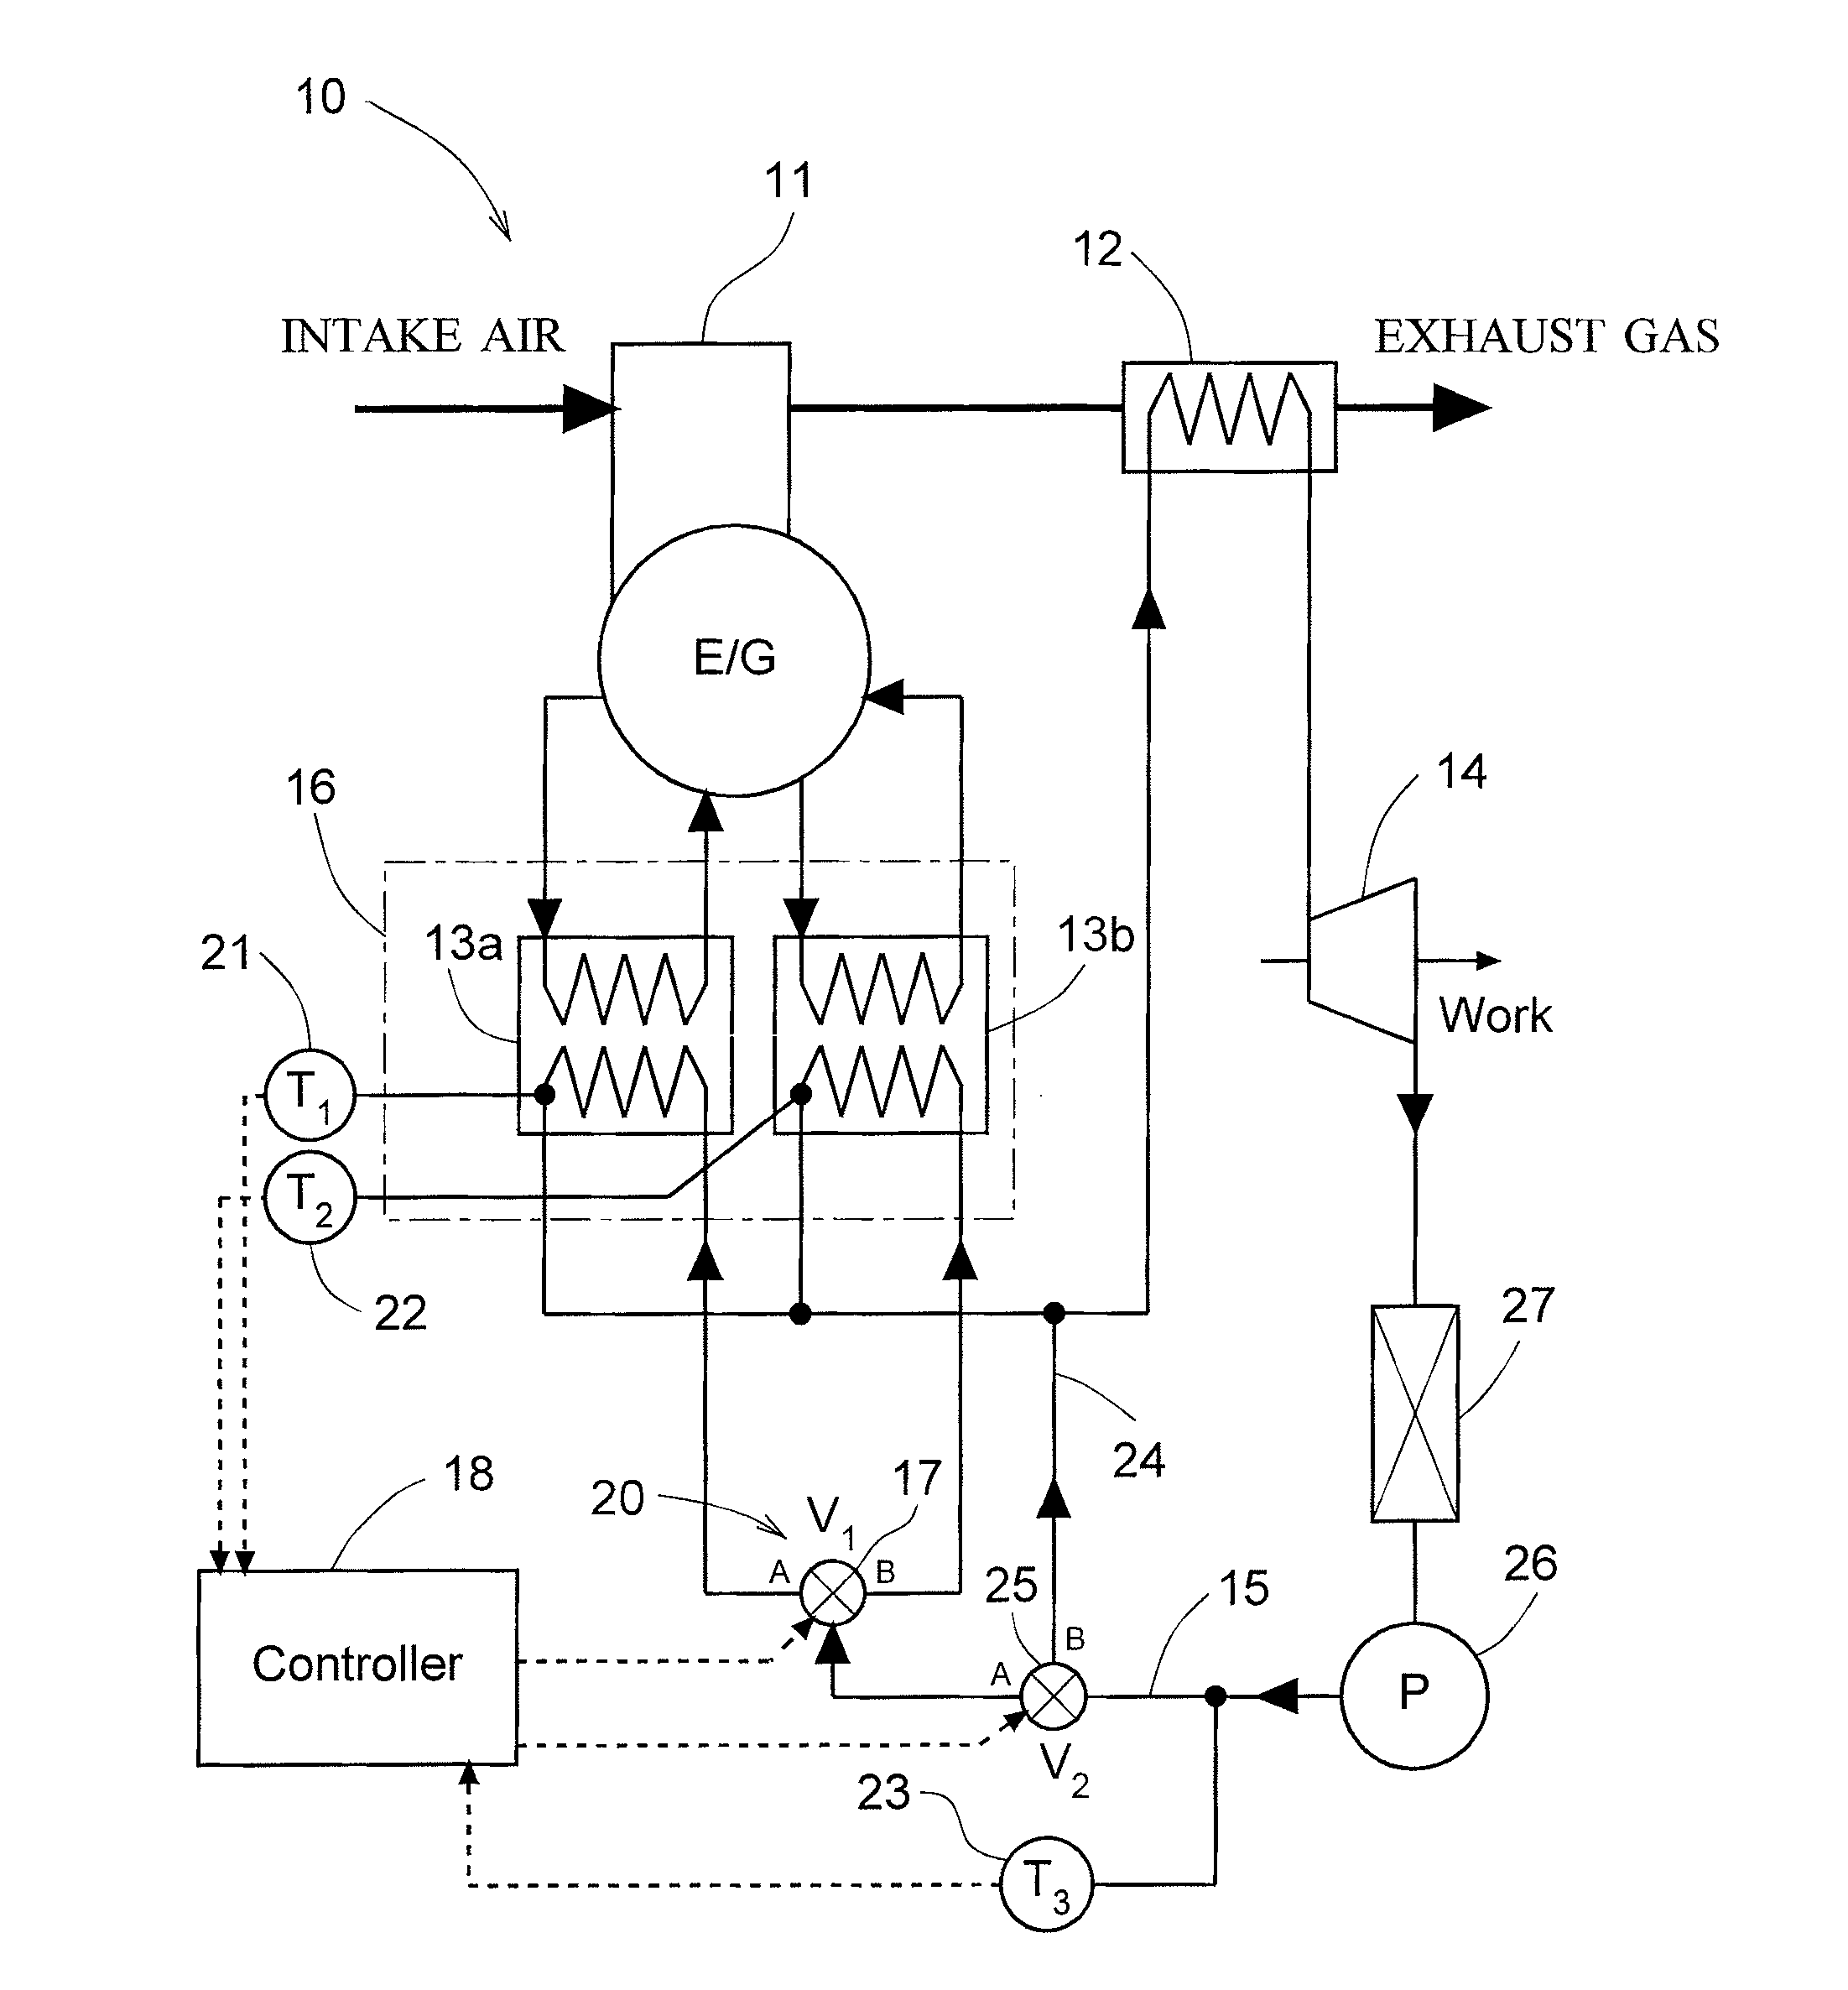 Waste heat recovering device